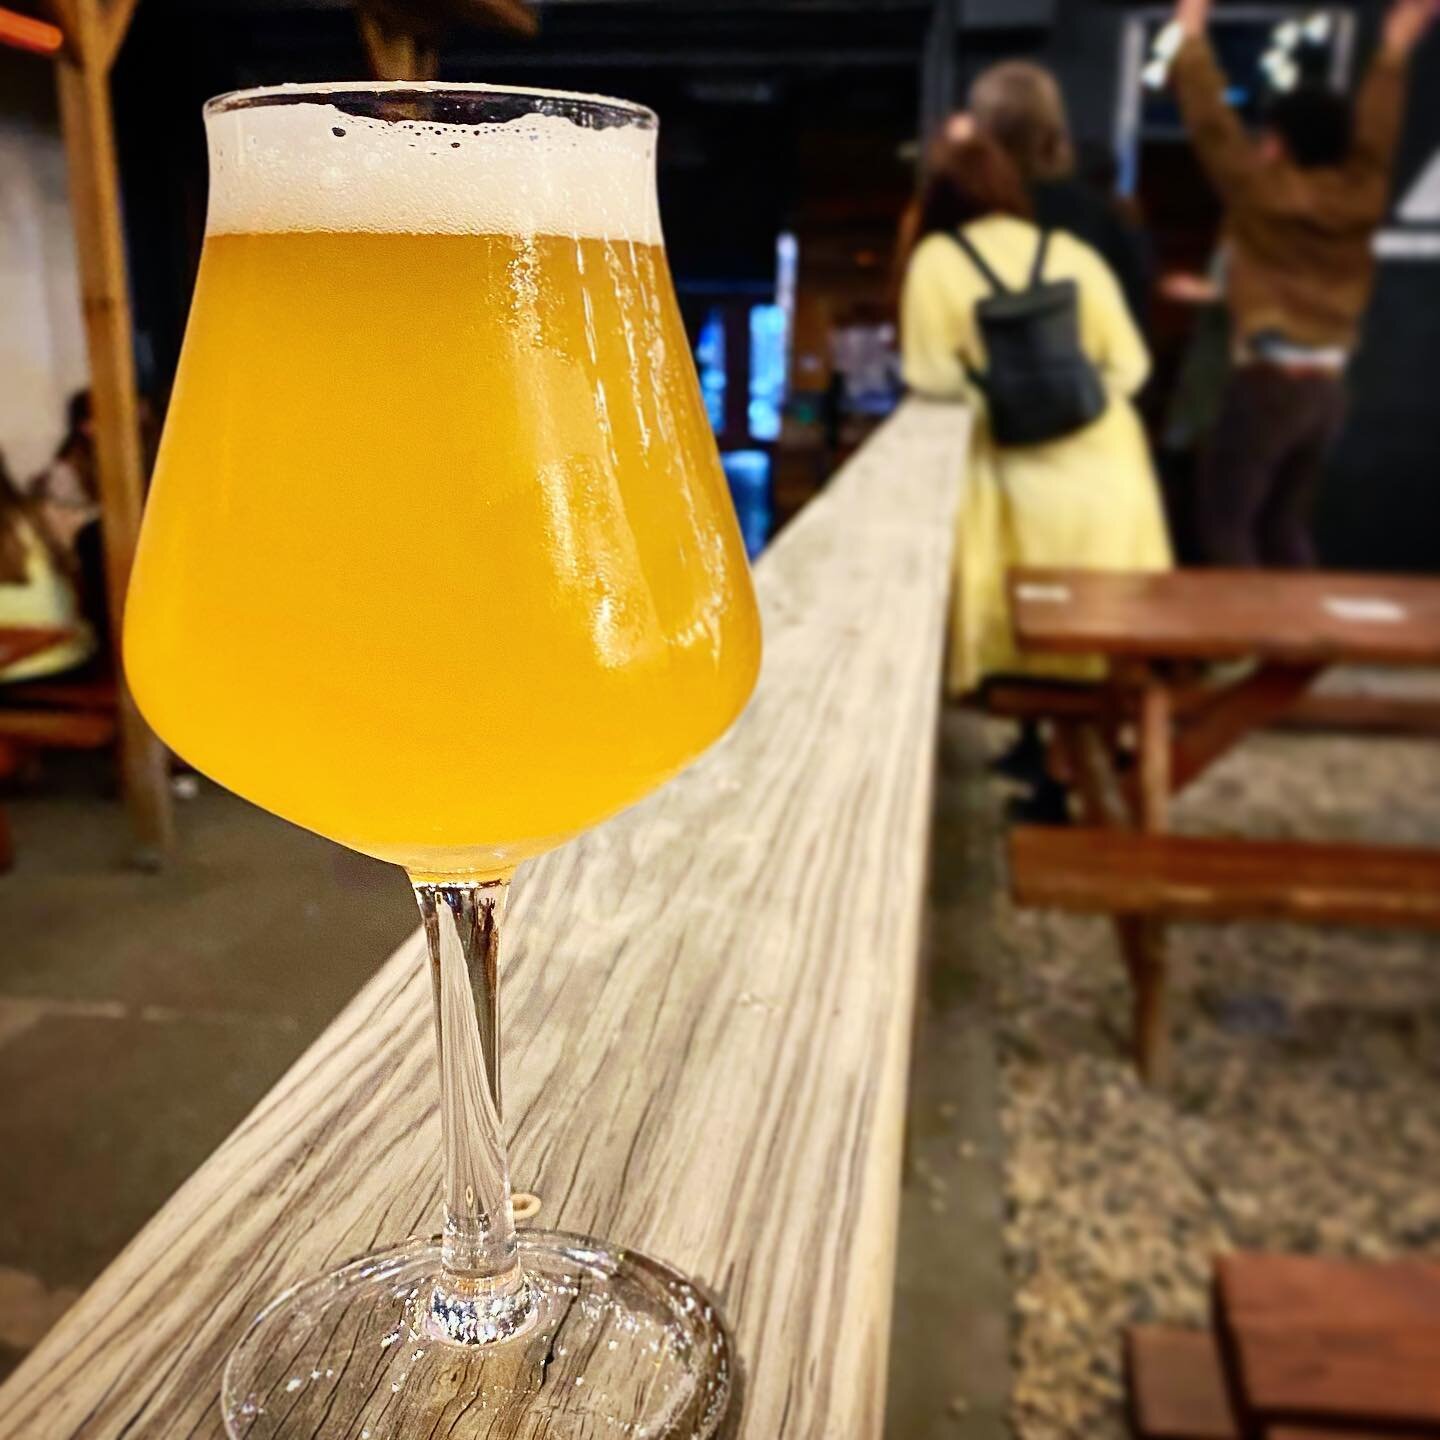 FOLK HERO, our new 5.9% saison is hitting the spot today 🎯 

New on tap, it&rsquo;s refreshing, with big juicy citrus notes and a dry finish. This is made for pitchers, drinking in the sun.

Try it on tap this weekend - what do you think of it??